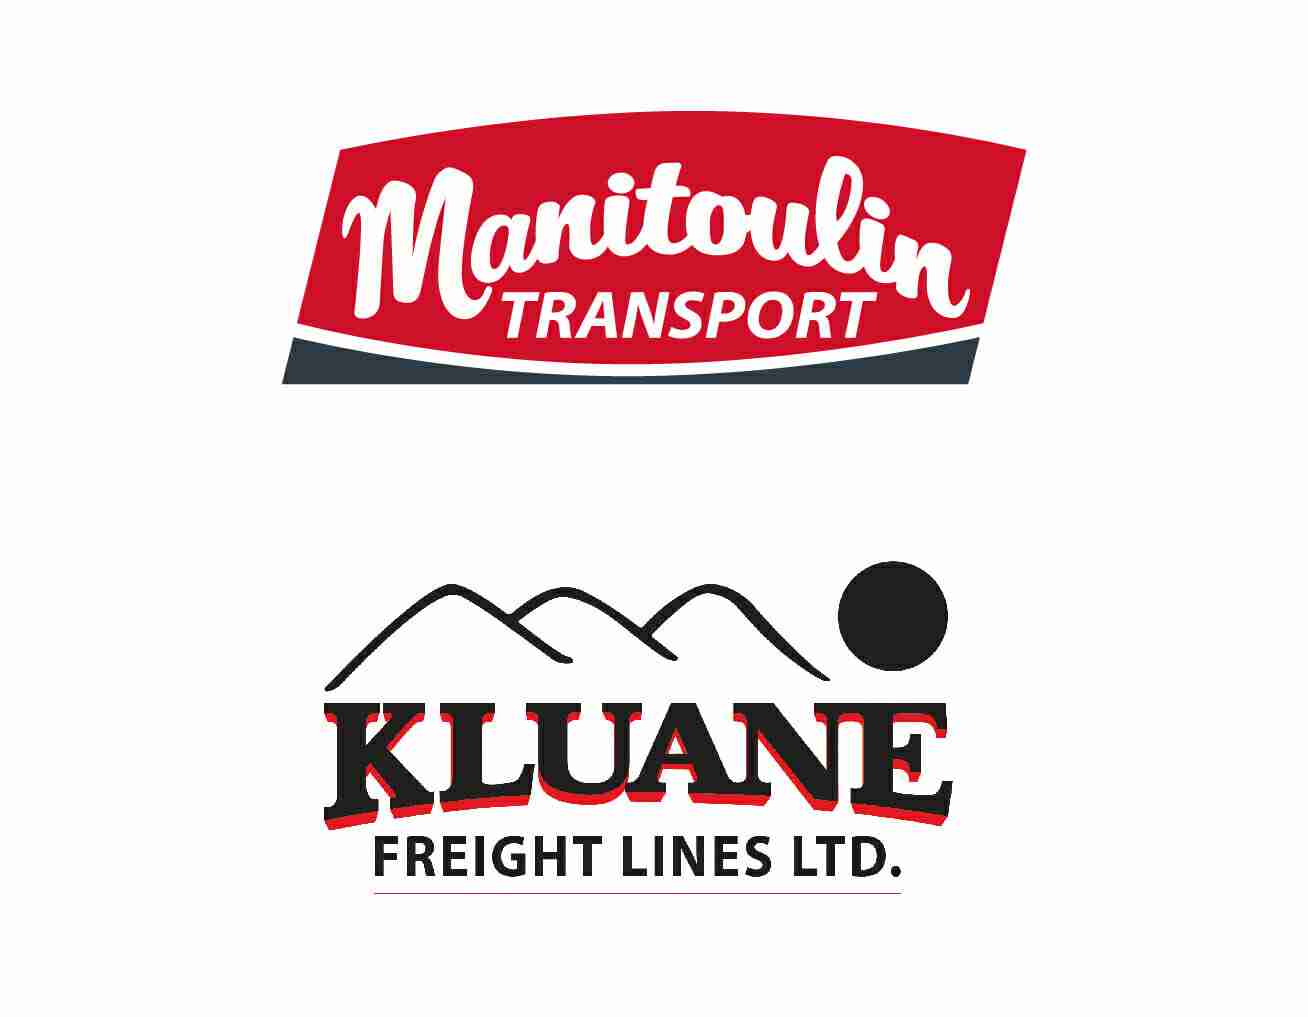 Manitoulin Transport Purchases Kluane Freight Lines Ltd.'s Book of Business - Forms Joint Venture with Chief Isaac Group of Companies